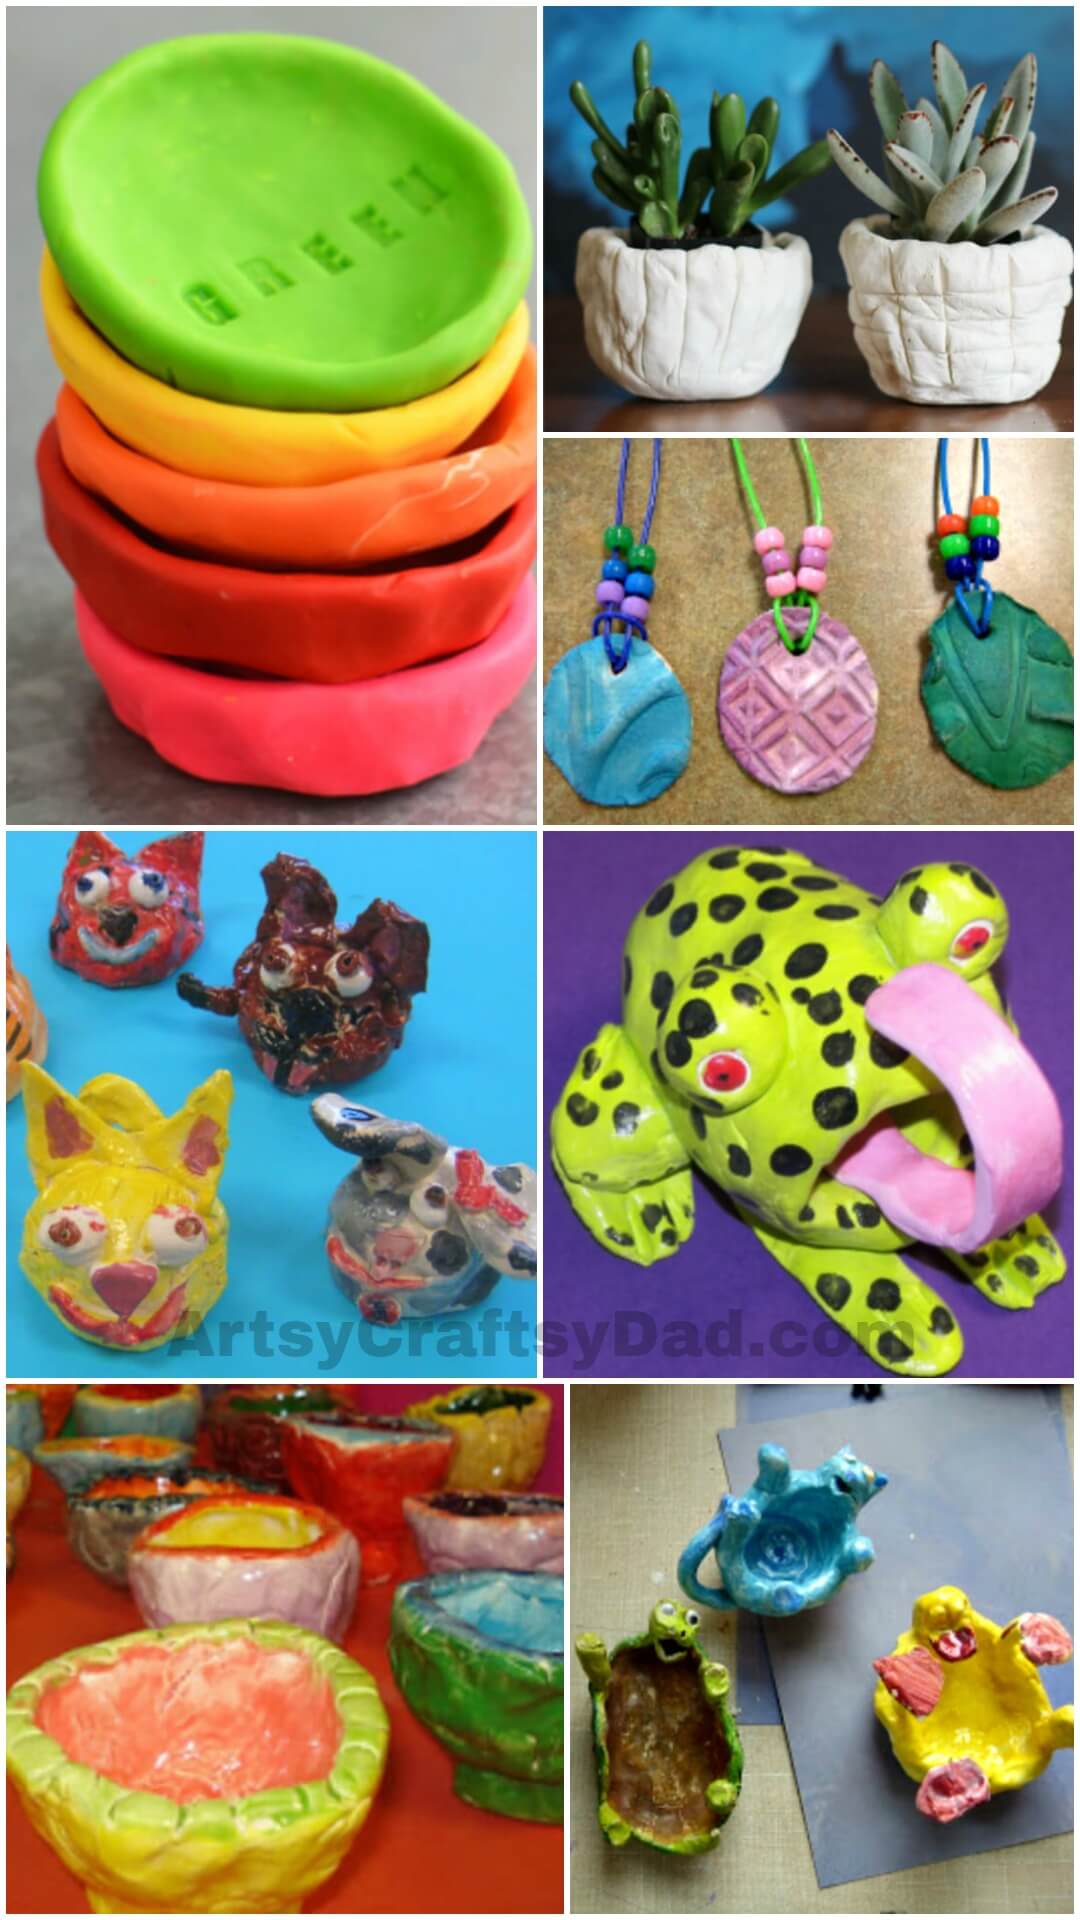 Clay projects for kids: How to make pinch pots, clay beads and other fun  clay stuff – Edu Art 4 Kids